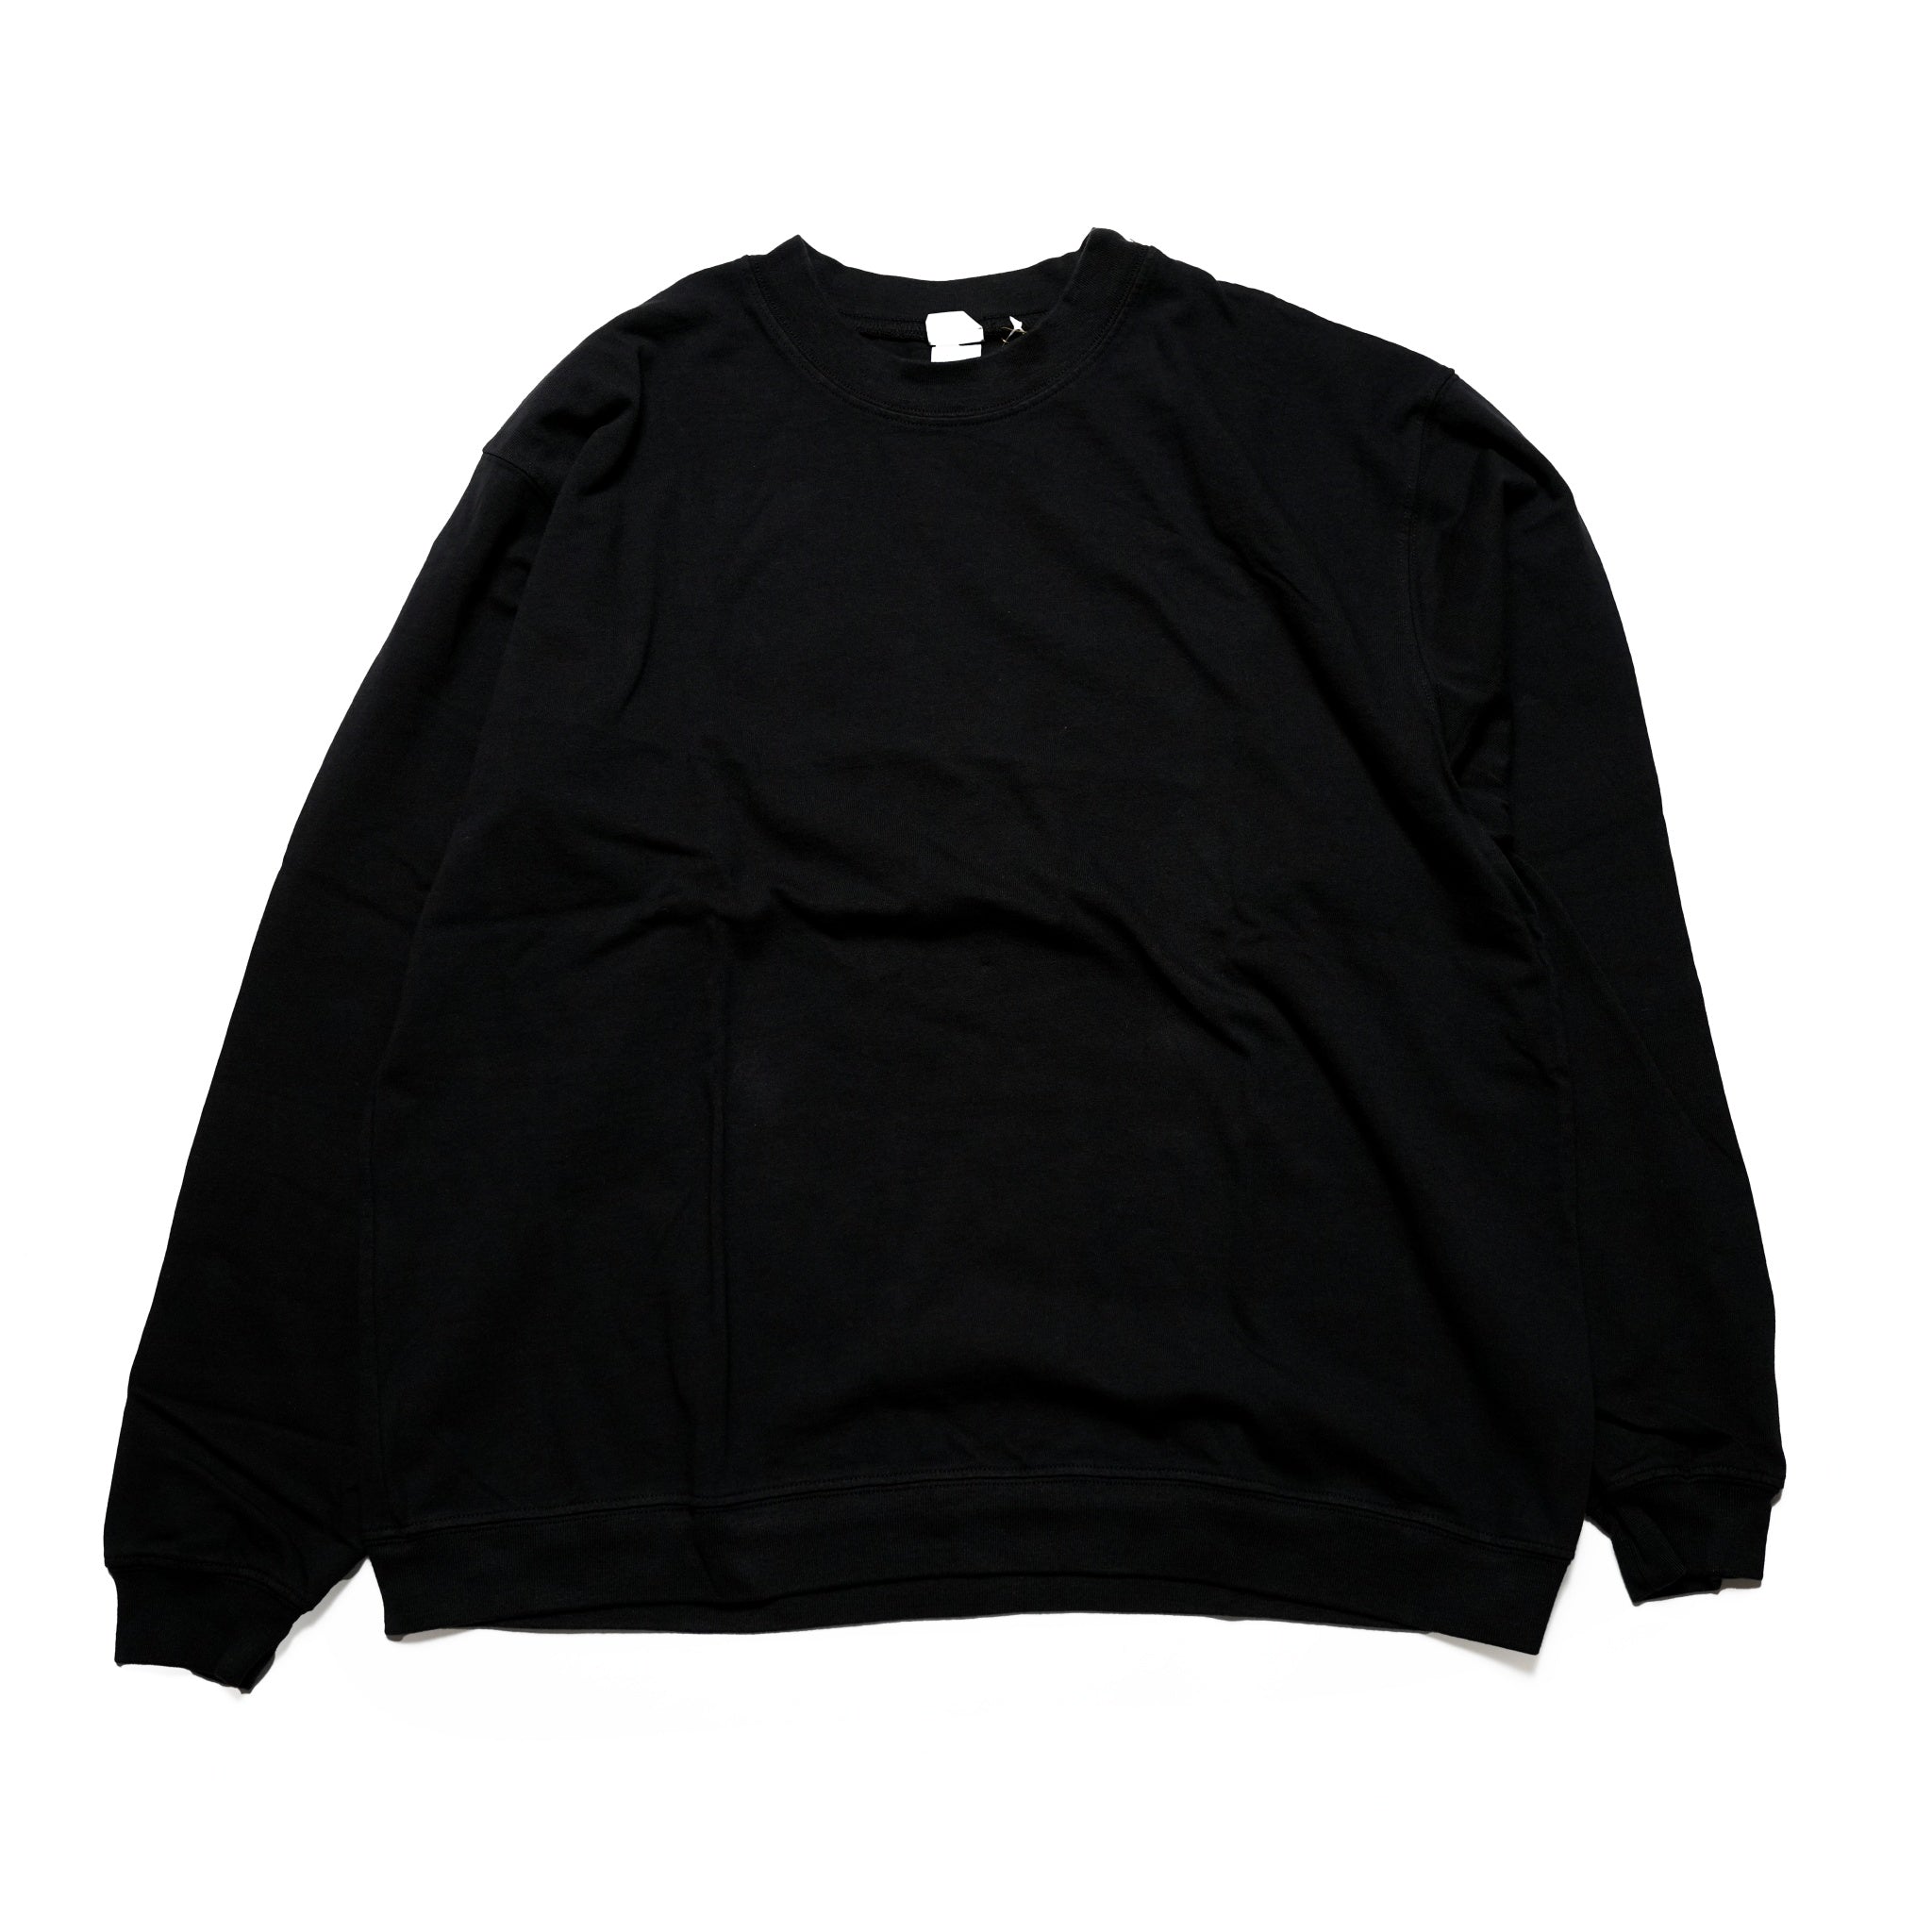 No:cstm02 | Name:Heavy Coton Sweat Shirts | Color:#White,#Black,#Navy,#Charcoal | Size:M/L/XL | 【SMOKE TONE×CAMBER】【SMOKE T ONE】【ONE CS FITS ALL】